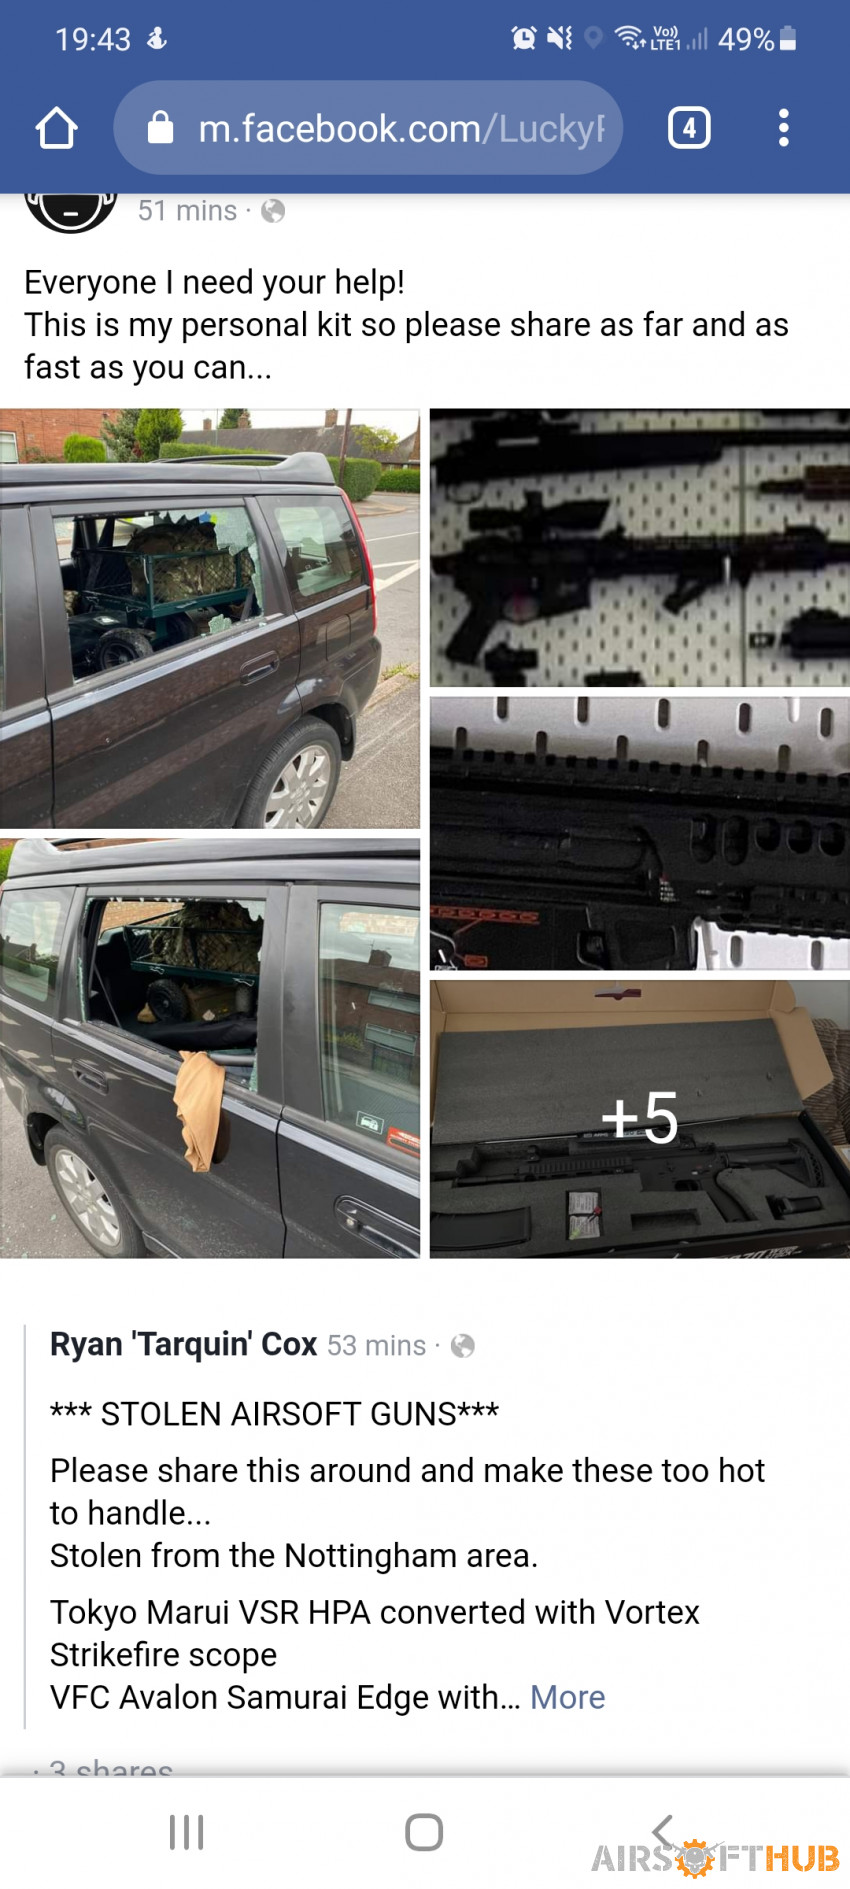 Stolen in Nottingham - Used airsoft equipment